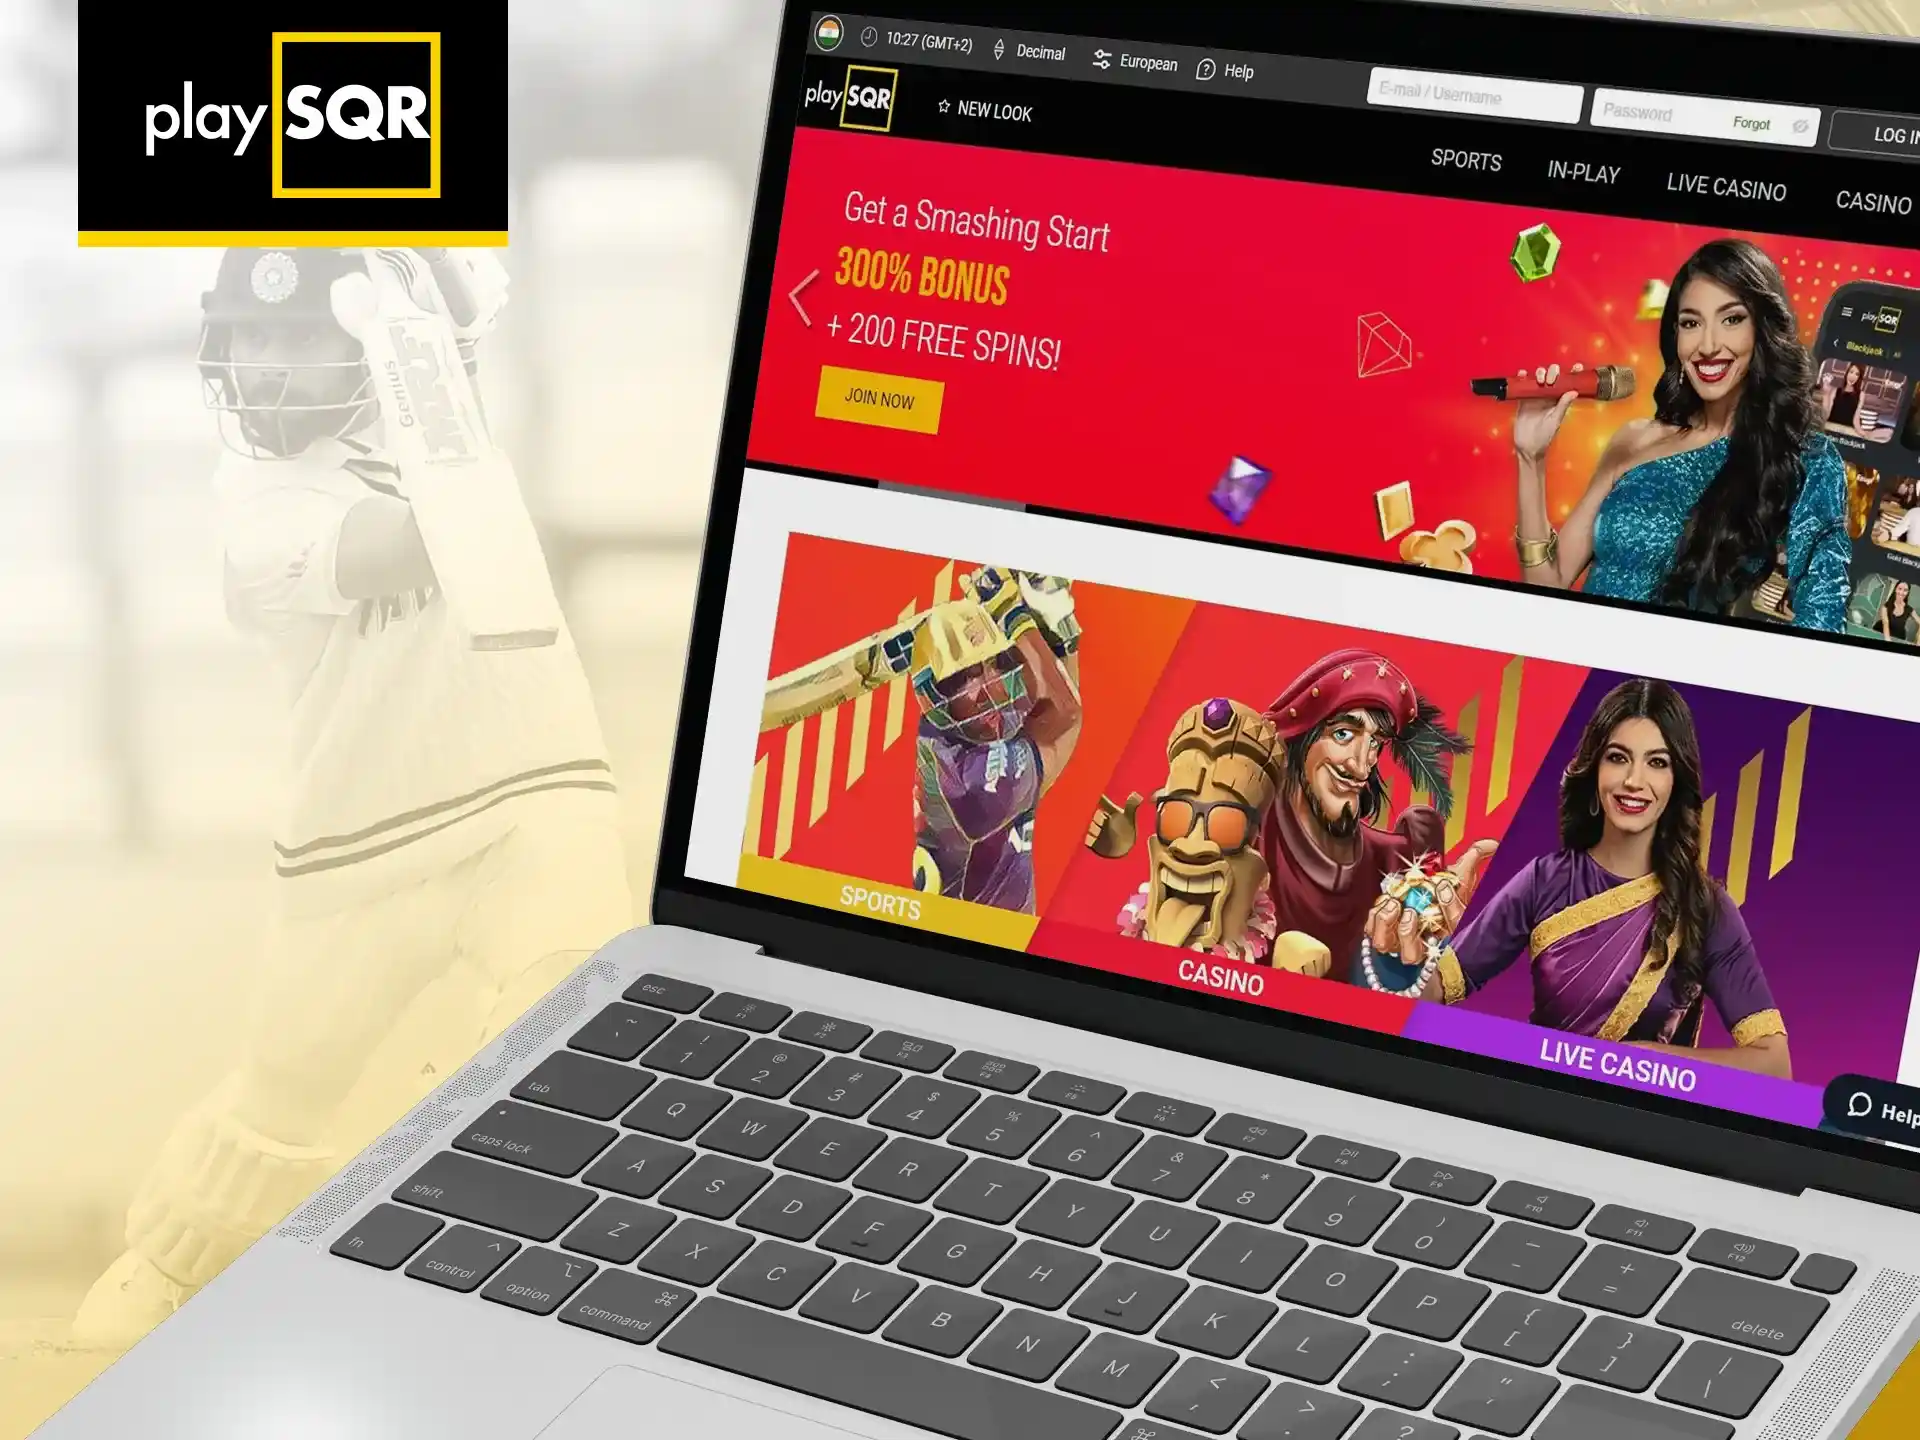 The PlaySQR site is popular in India for its exciting sports betting and casino games.